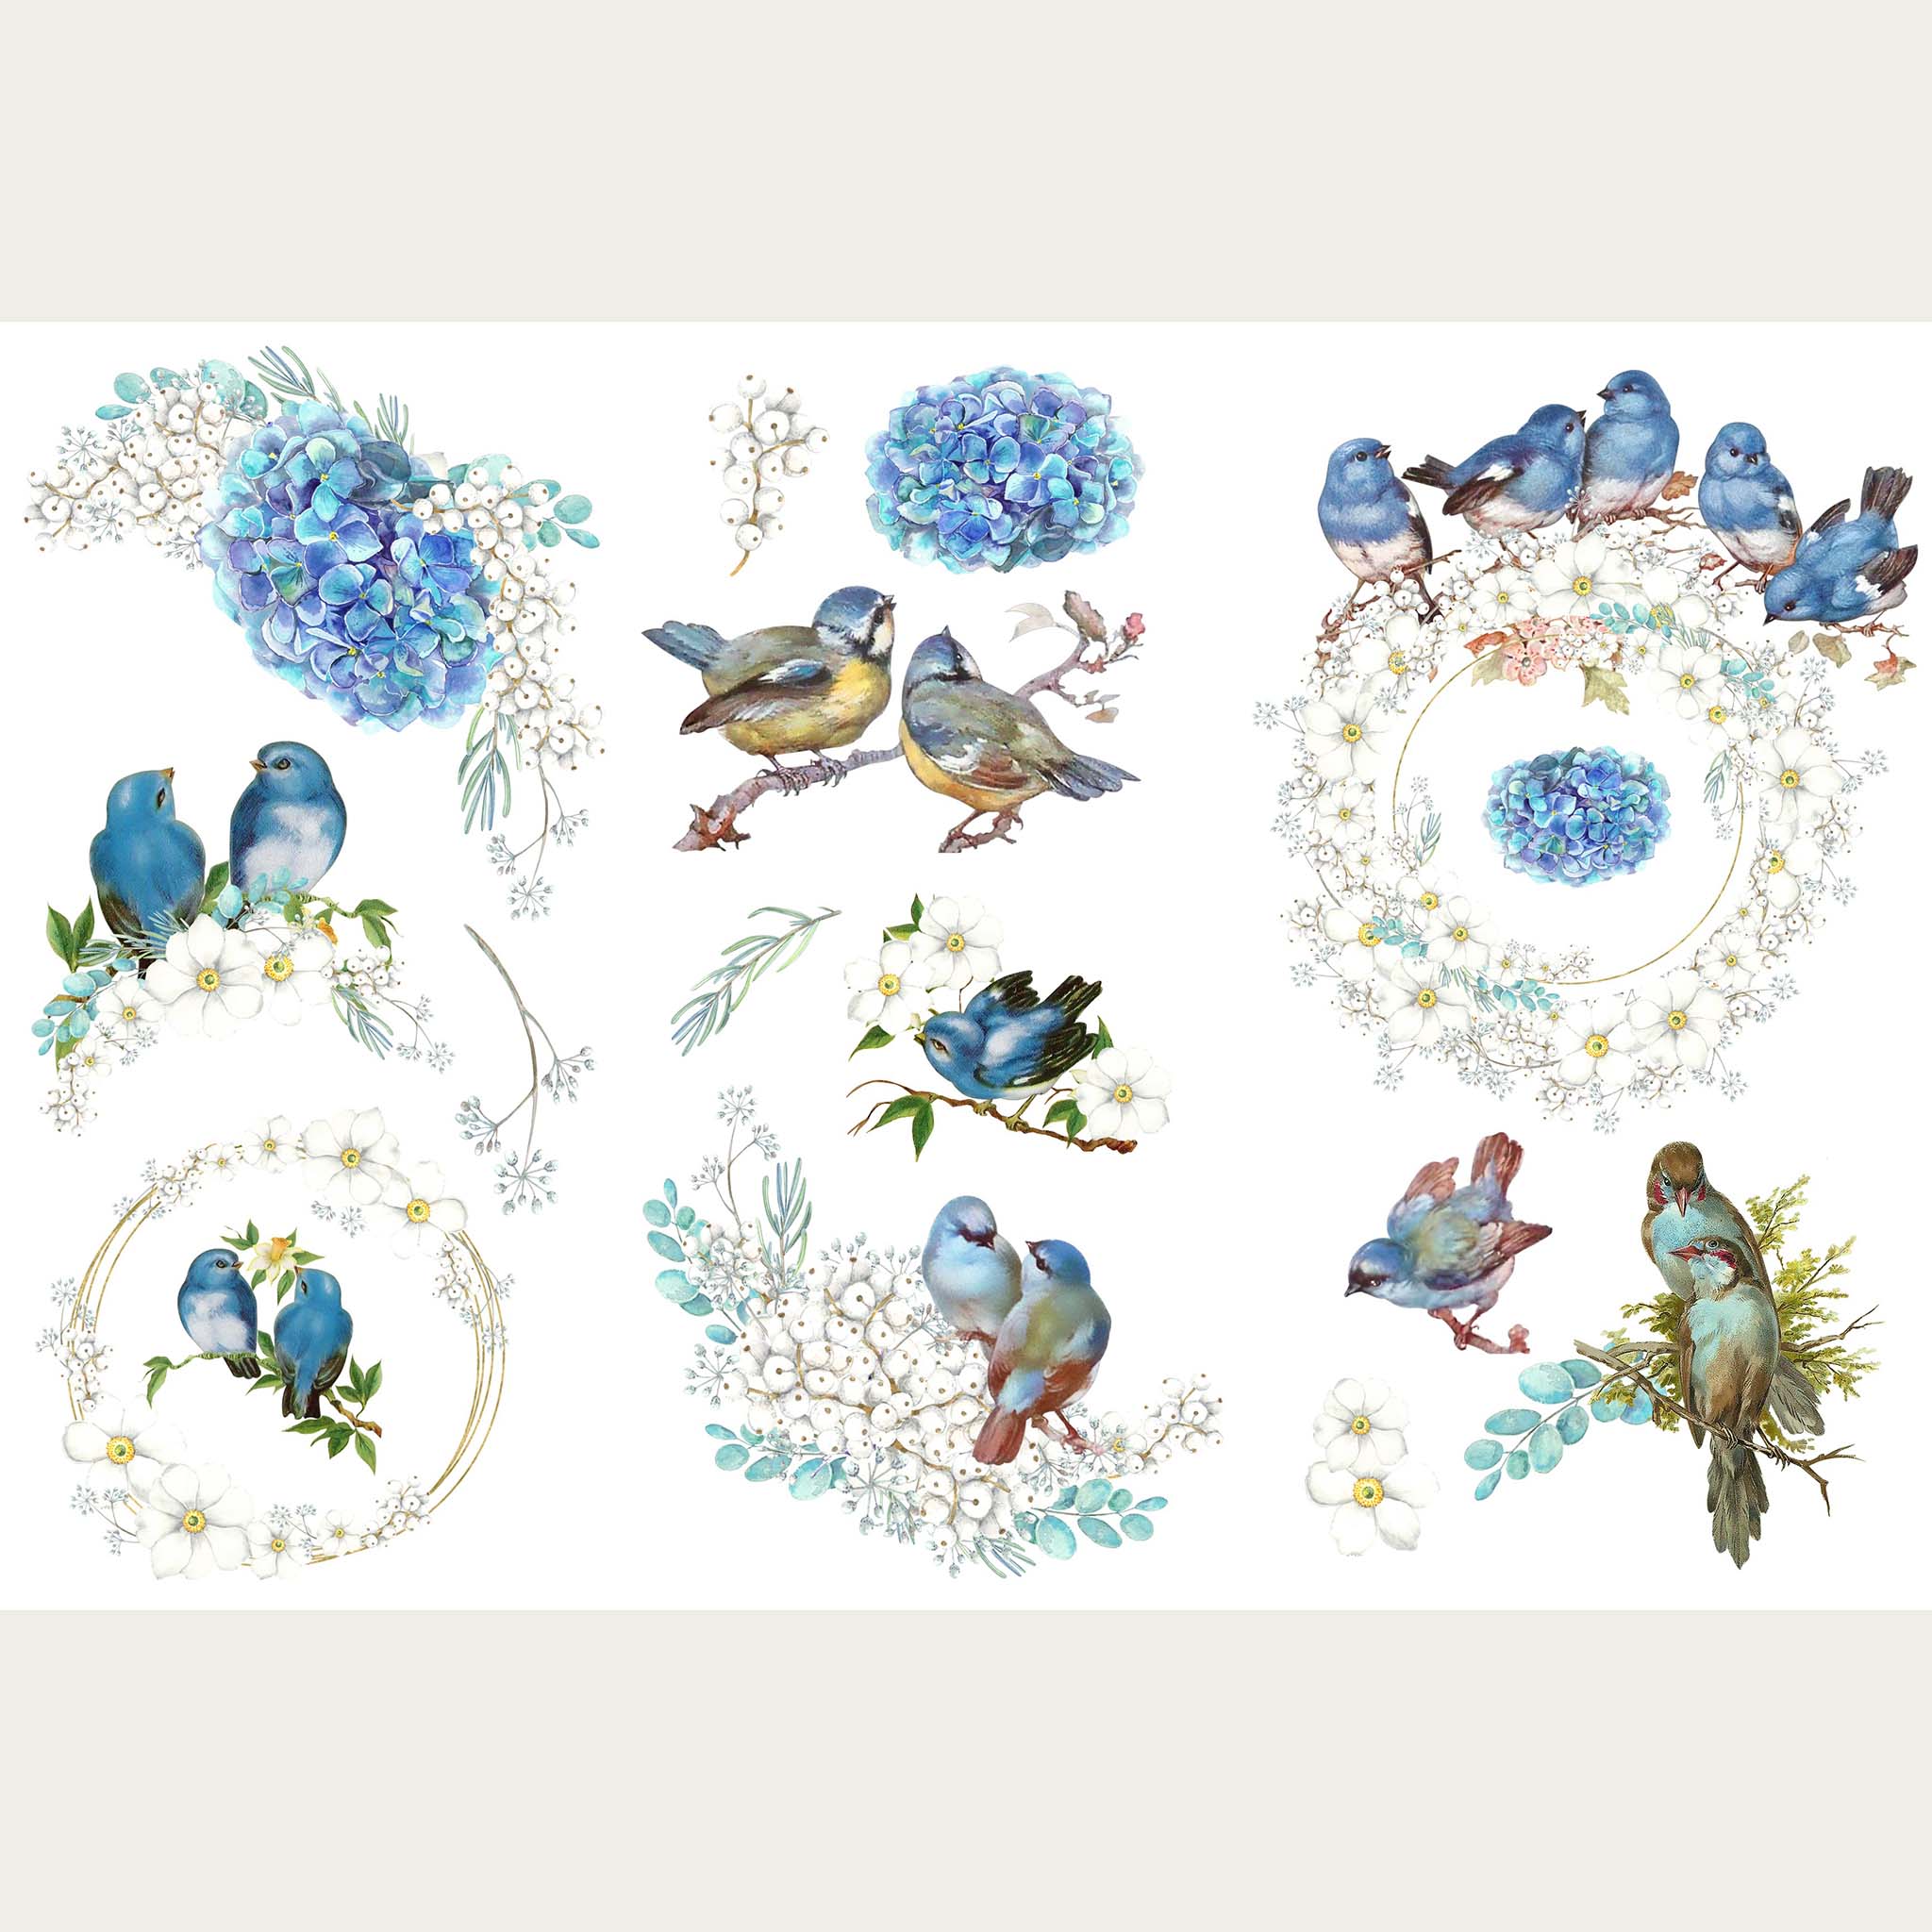 Three sheets of rub-on transfers with blue hydrangea flowers and blue birds on branches. Each sheet has a different variation of designs.